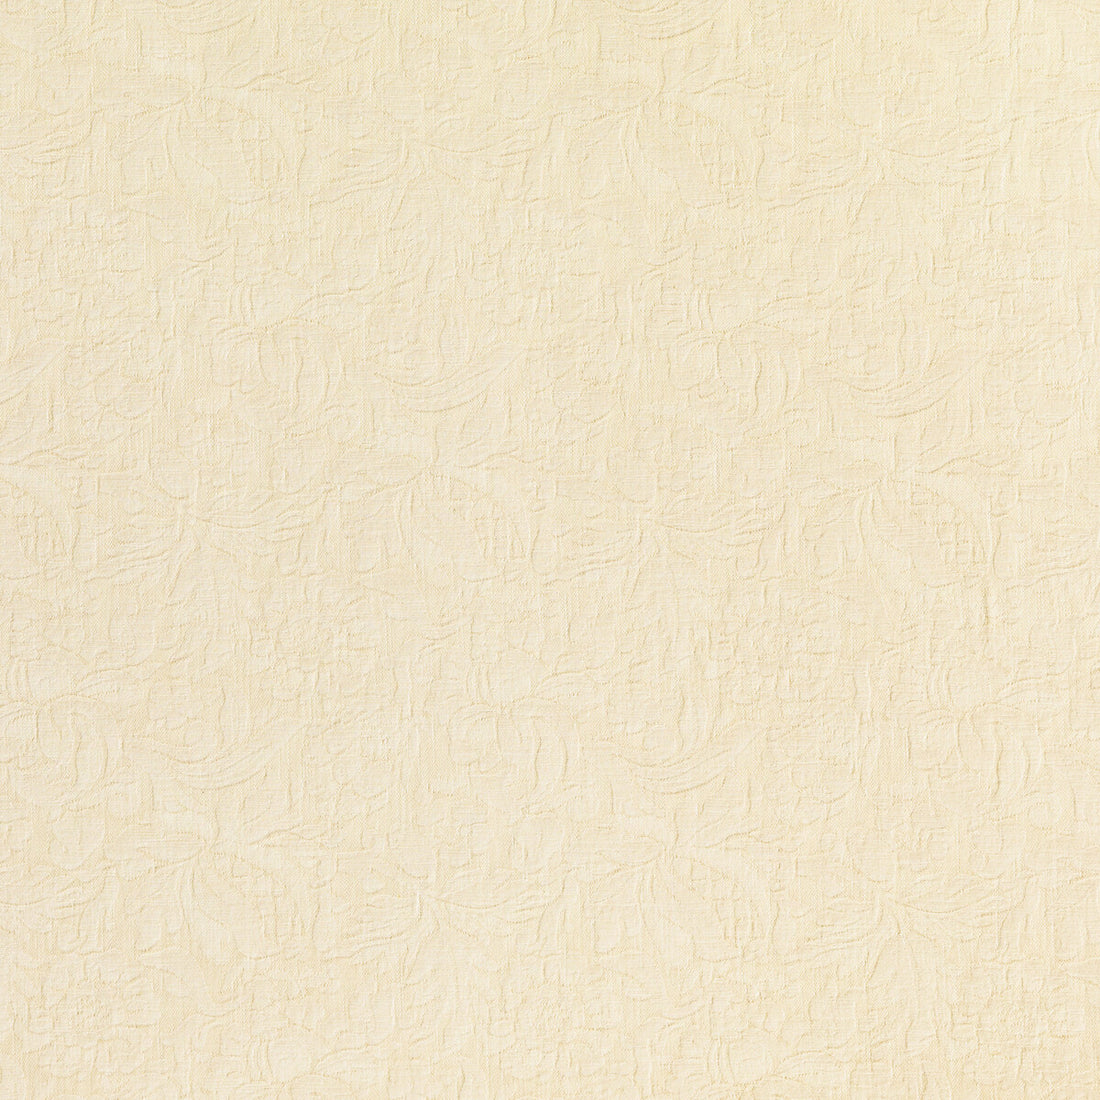 Gambetta Weave fabric in ivory color - pattern 8019120.1.0 - by Brunschwig &amp; Fils in the Alsace Weaves collection